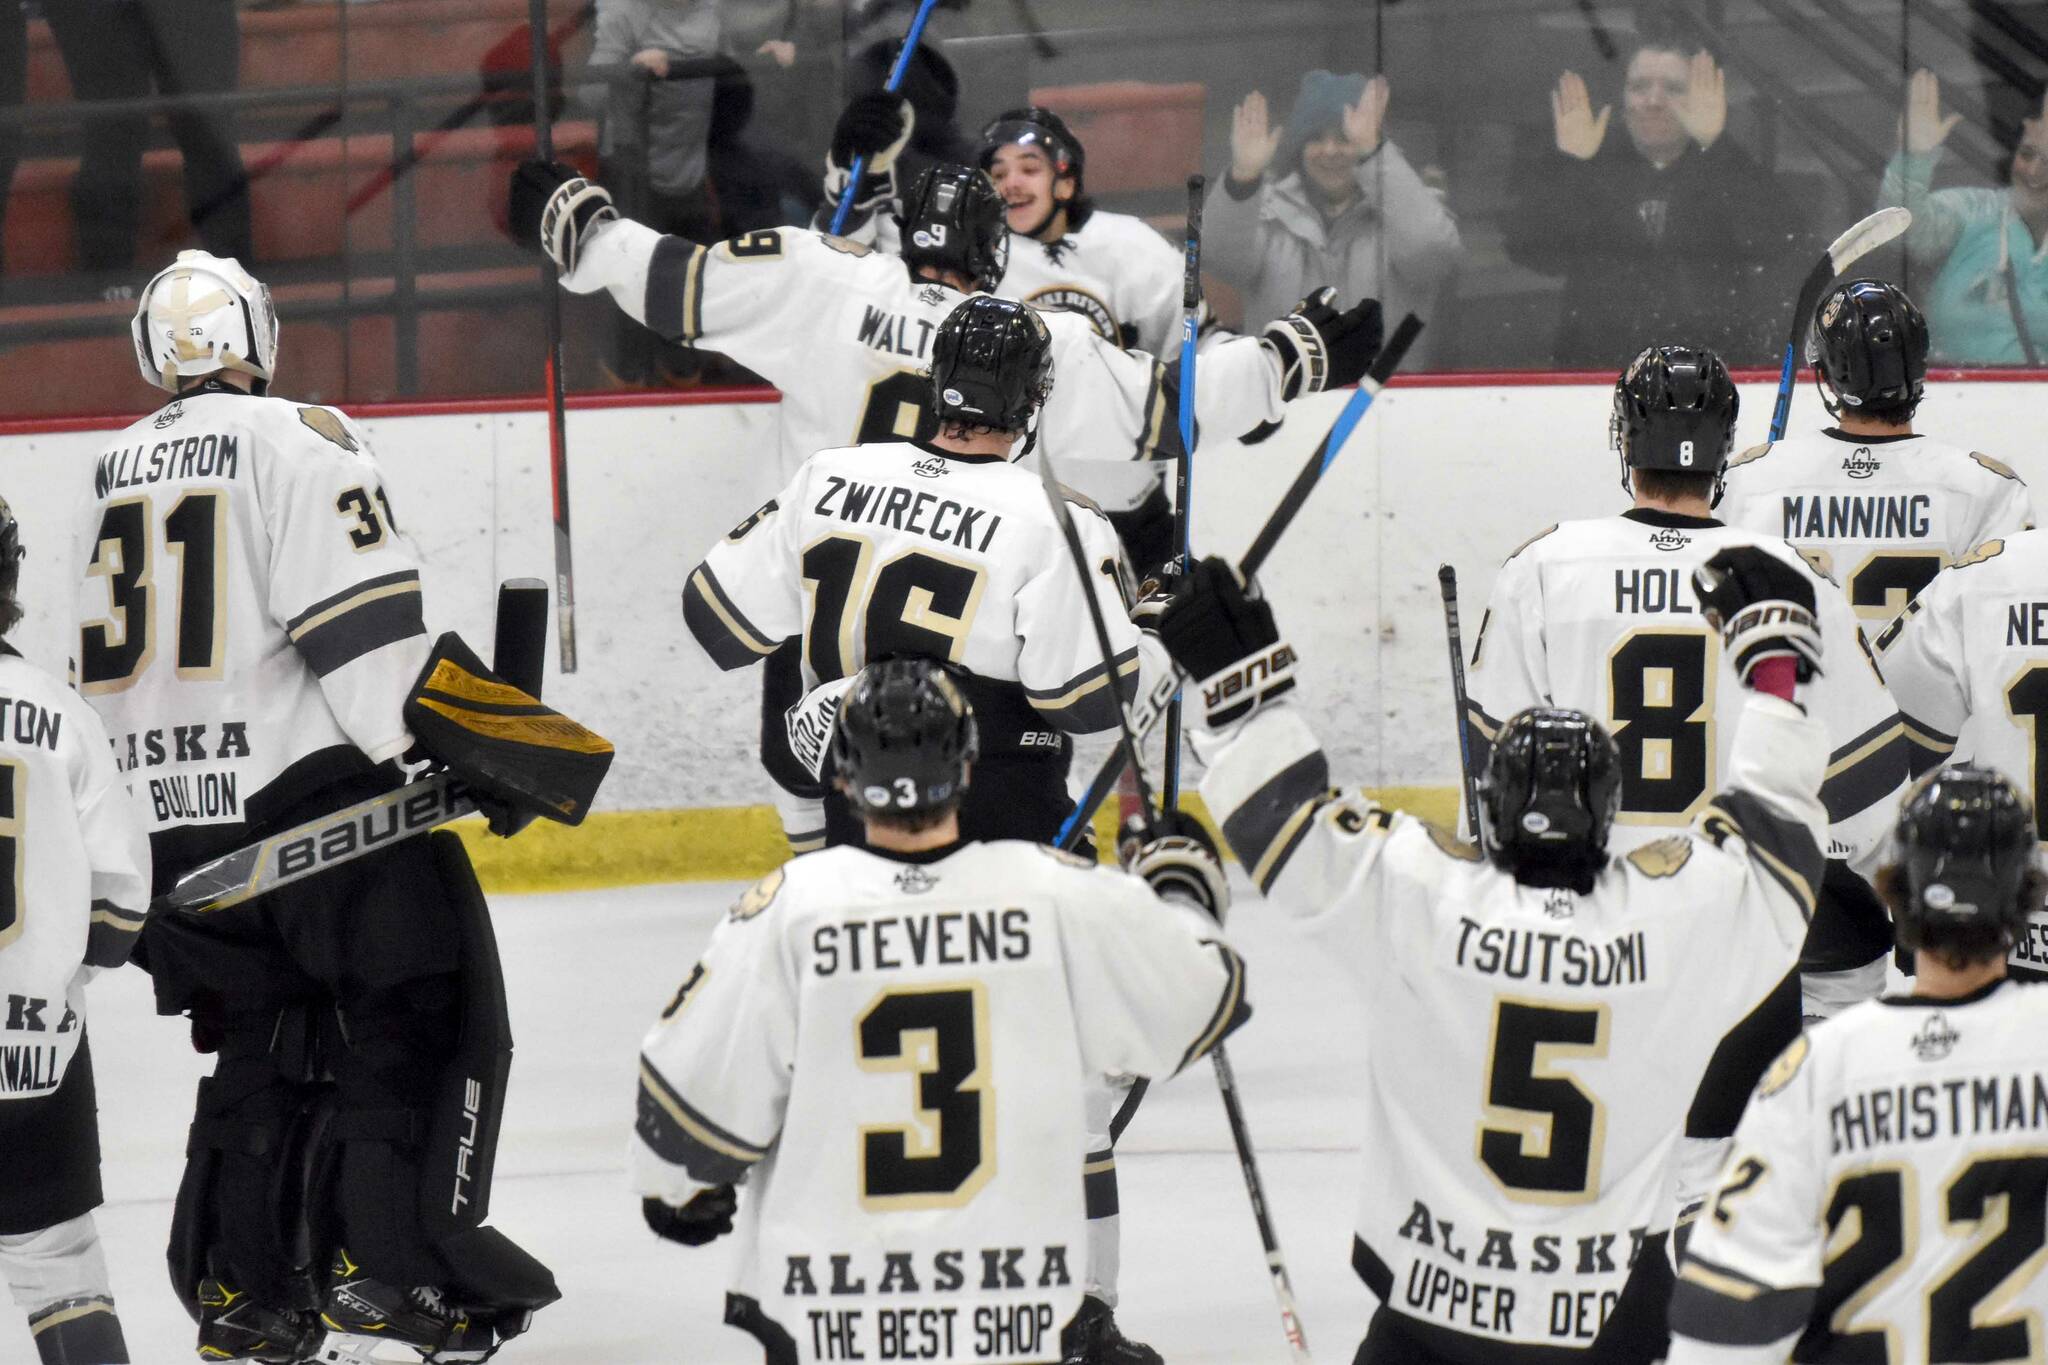 The Kenai River Brown Bears mob Ryan Finch after he scored the game-winning goal in overtime against the Janesville (Wisconsin) Jets on Saturday, Feb. 25, 2023, at the Soldotna Regional Sports Complex in Soldotna, Alaska. (Photo by Jeff Helminiak/Peninsula Clarion)